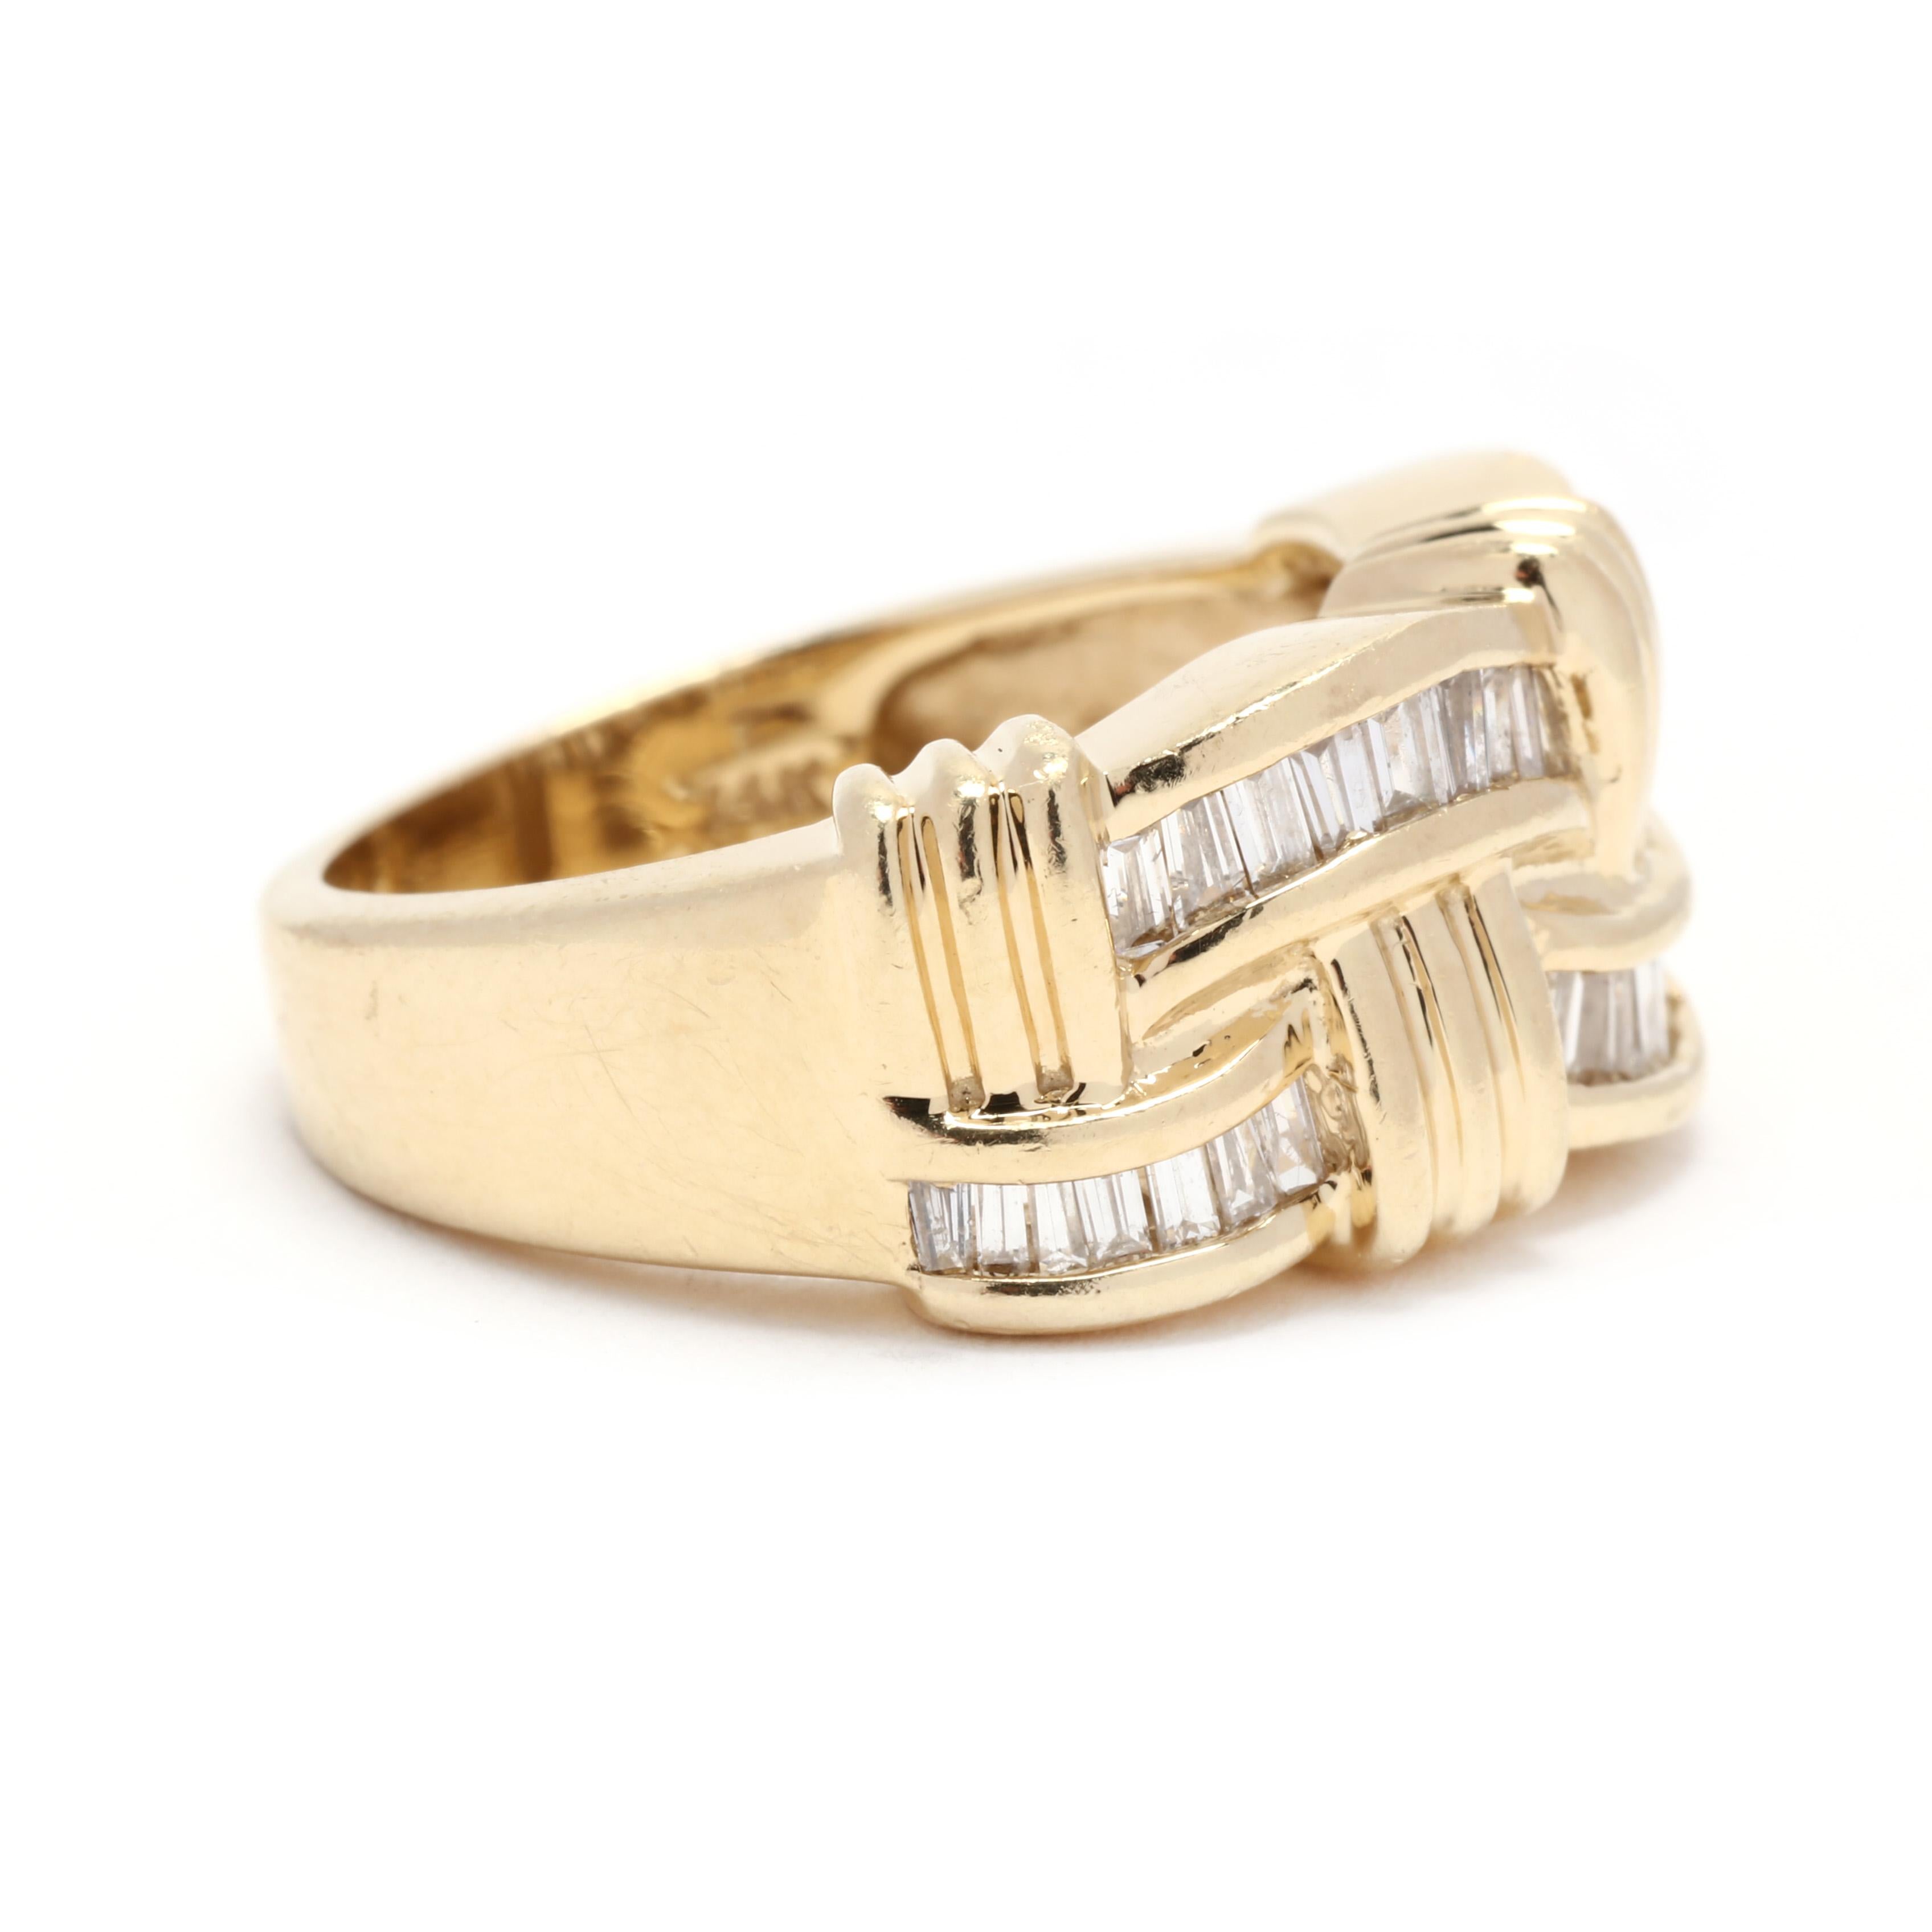 A vintage 14 karat yellow gold woven diamond band ring. This wave statement ring features a two row wave design with channel set tapered baguette cut diamonds weighing approximately .75 total carats and with gold woven throughout.

Stones:
-